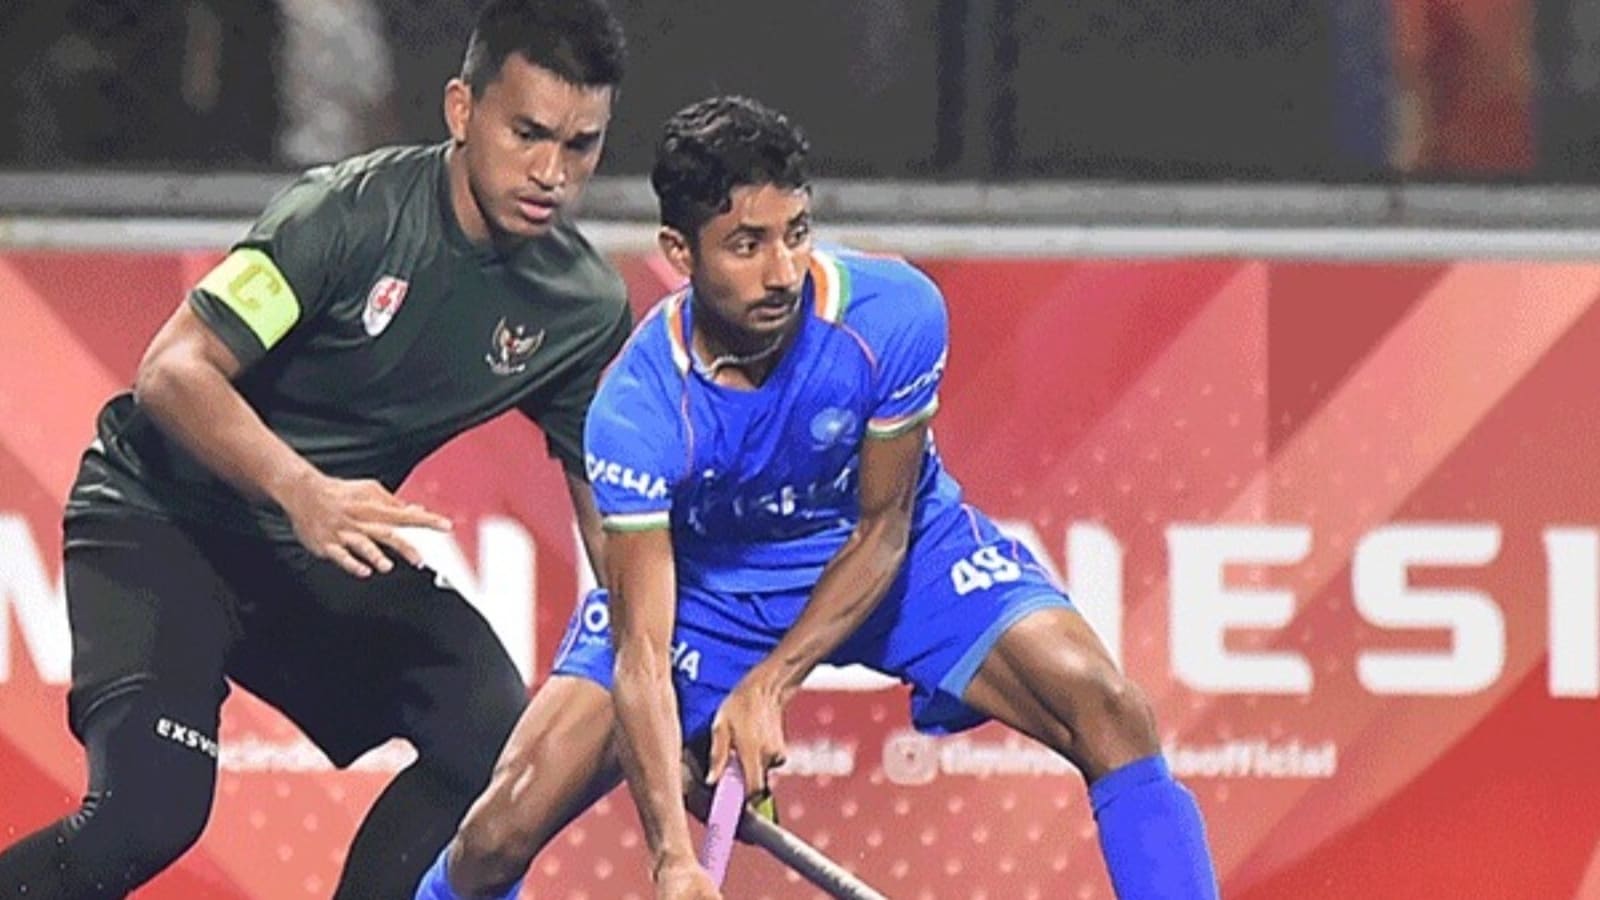 Asia Cup 2022: India qualify for Super 4s with incredible 16-0 win against Indonesia; finish above Pakistan in Pool A